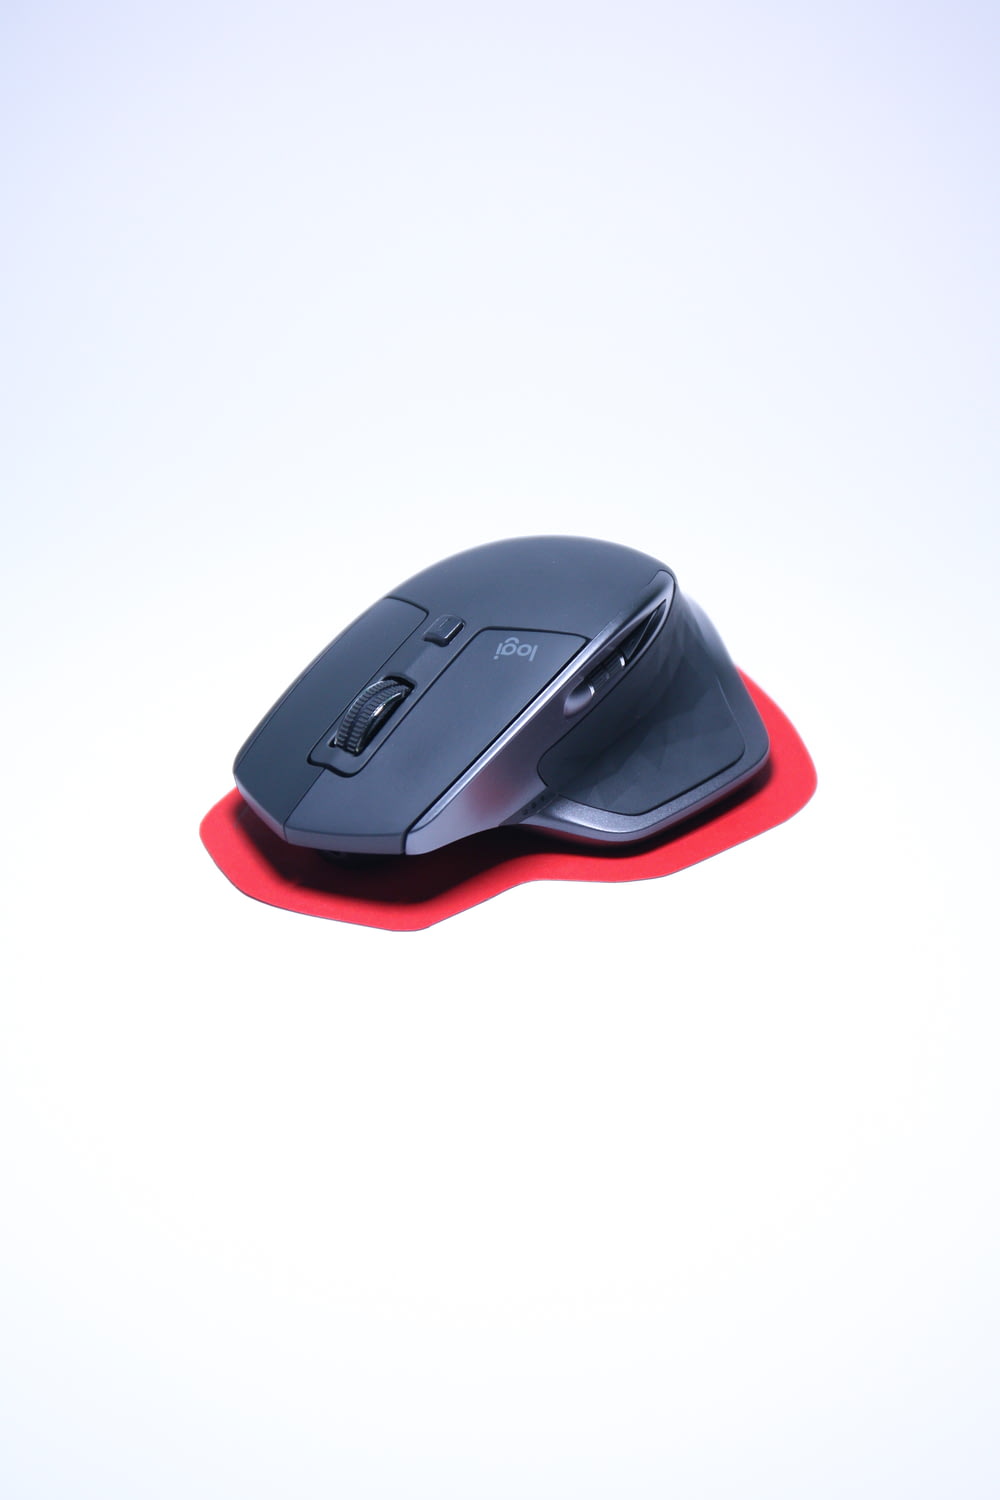 black and red cordless computer mouse